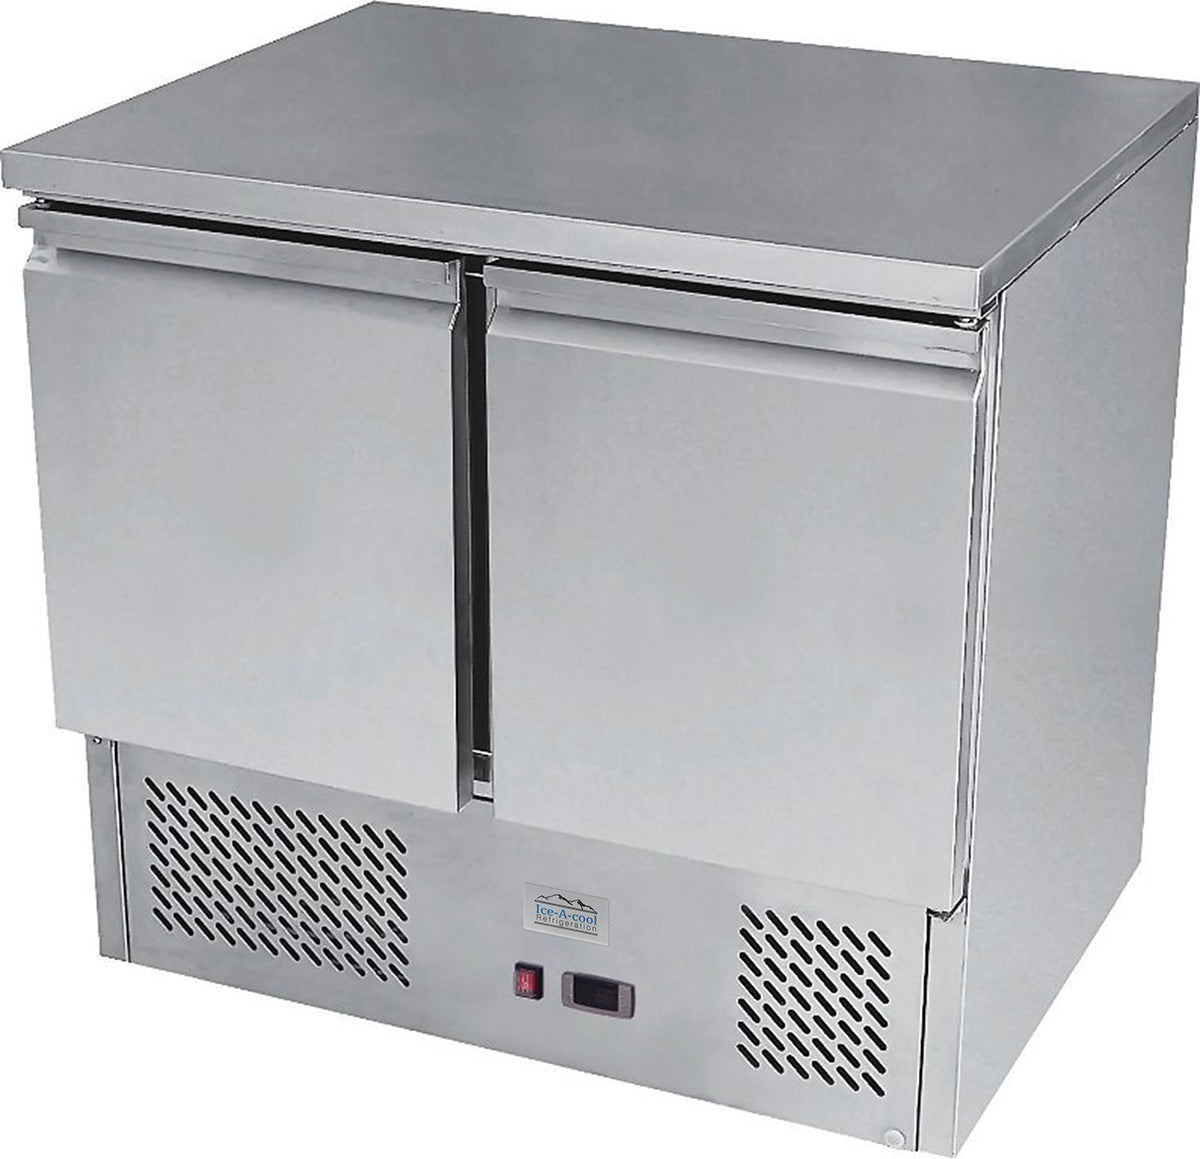 Ice-A-Cool ICE3801GR 2 Door Counter Refrigerator 300 Litres JD Catering Equipment Solutions Ltd